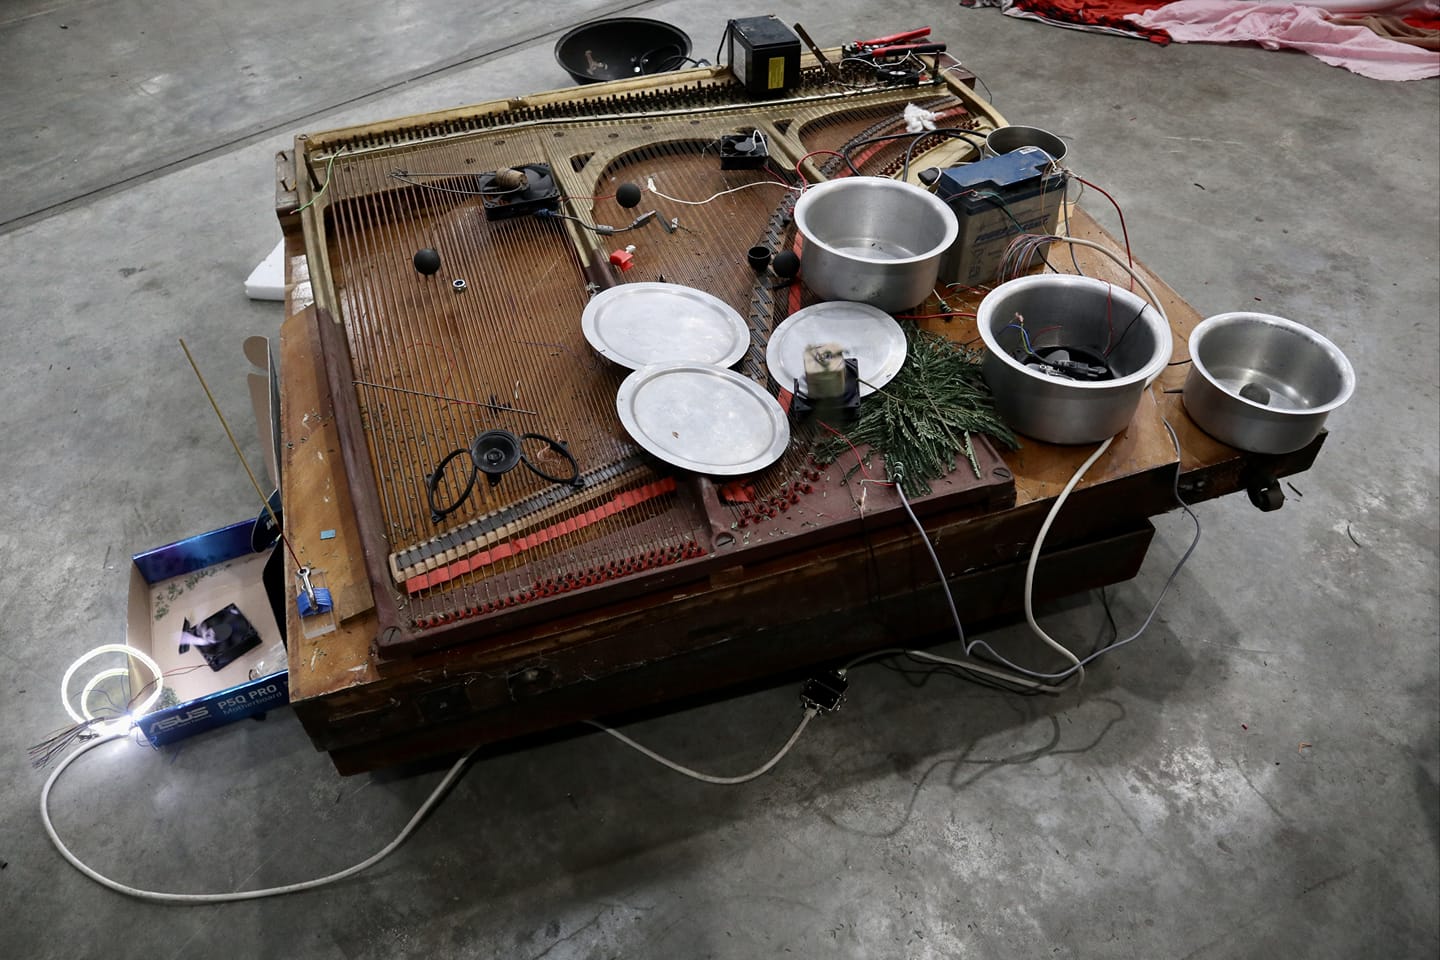 Co-Creating Audio Pleasures: Wasting Sound Through Wasteful Means Participatory Performance